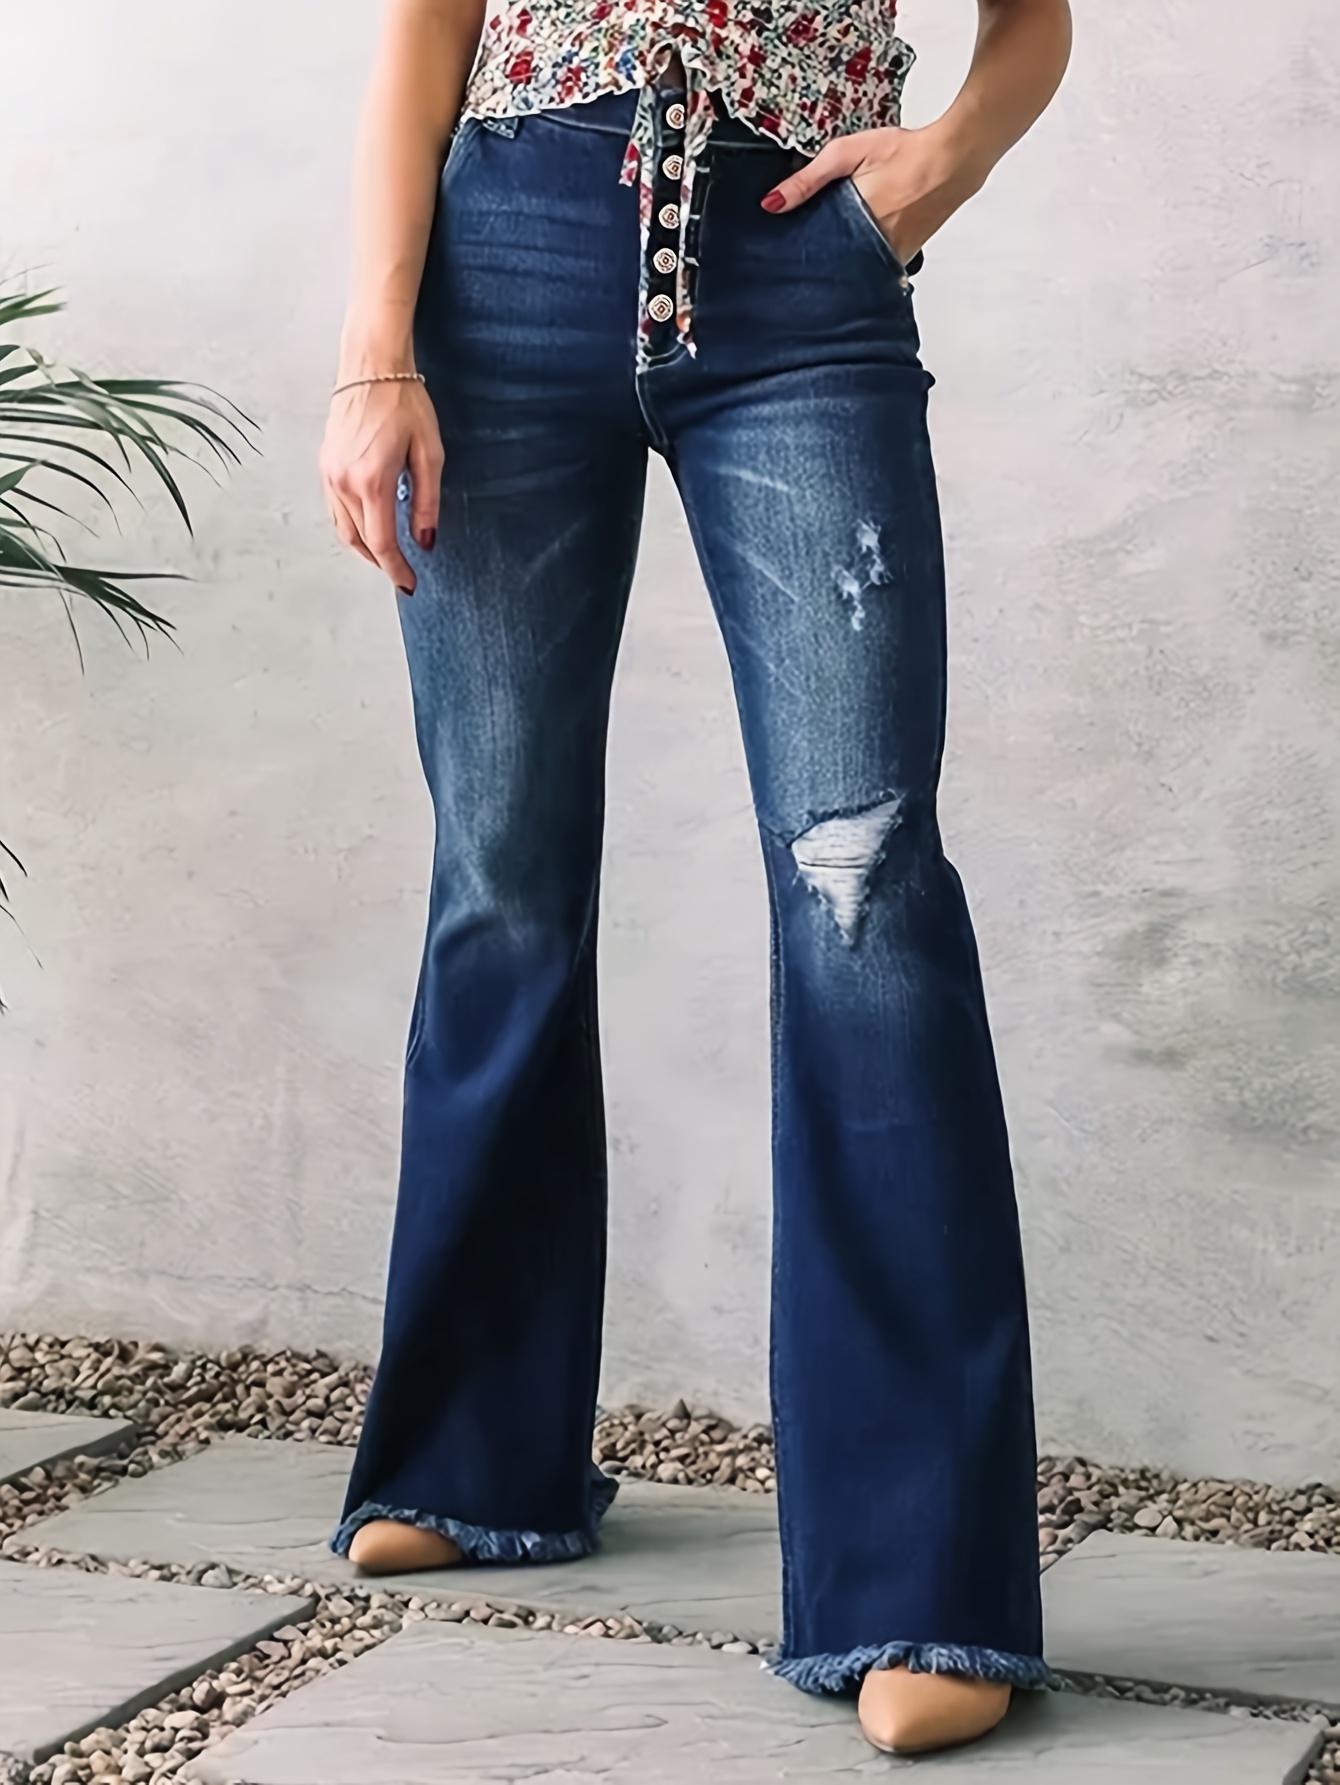 Women's Retro Style Skinny Bell Bottom Jeans Classic High Rise Button Fly Flare  Jeans Slim Solid Trousers Jeans 